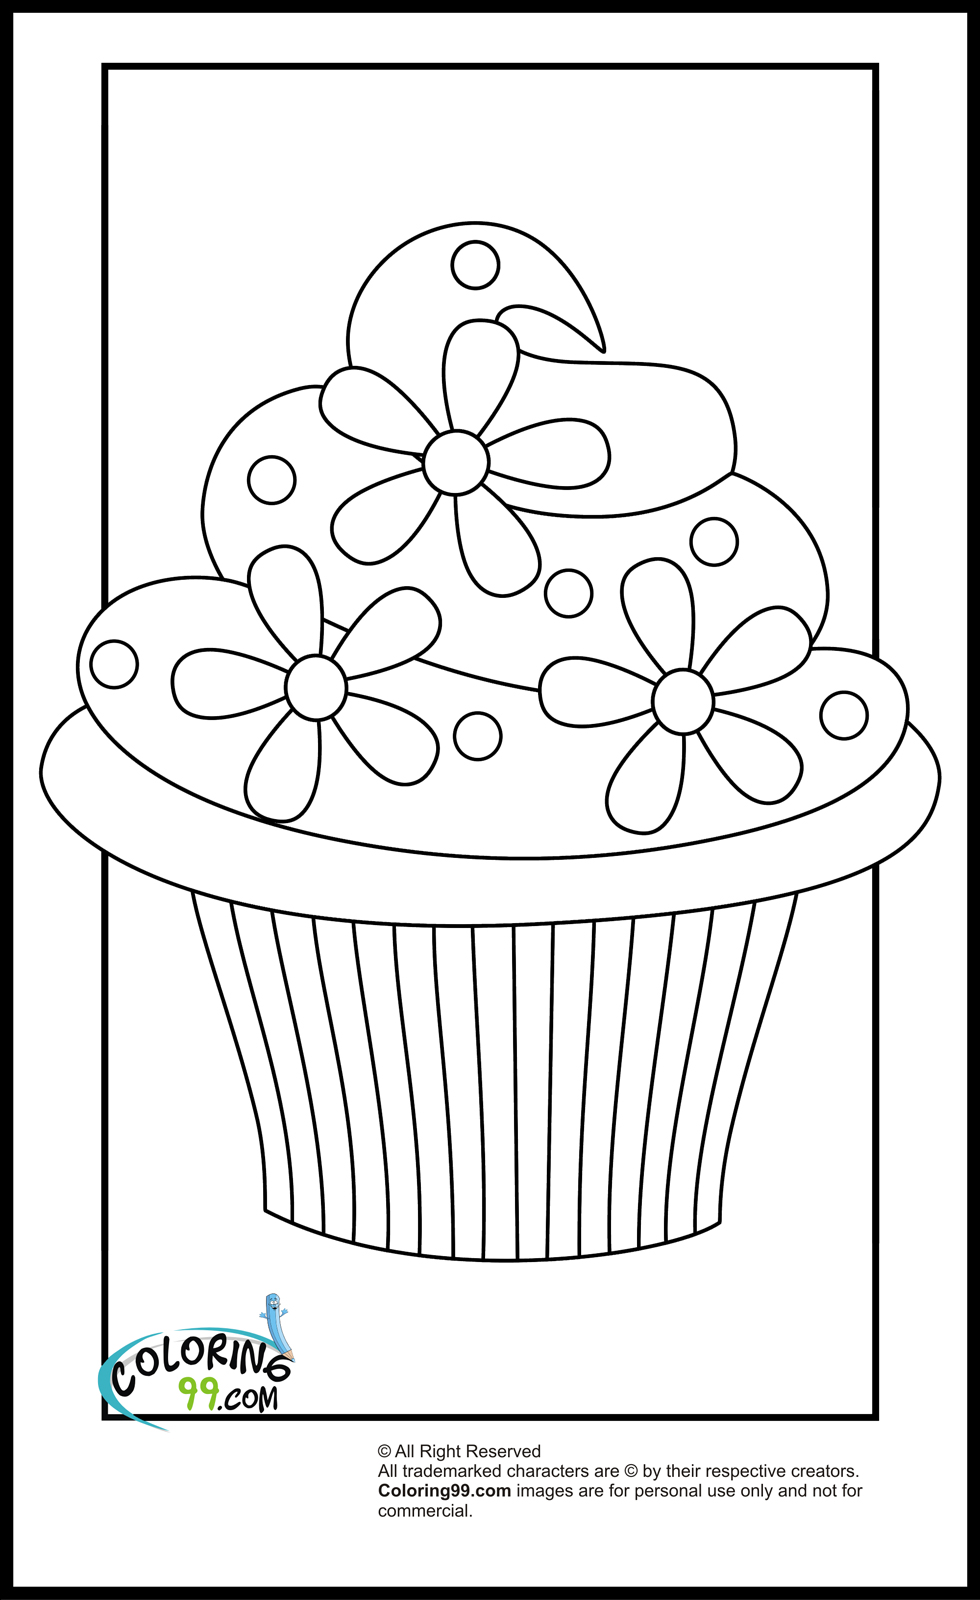 Cupcake Coloring Pages | Team colors